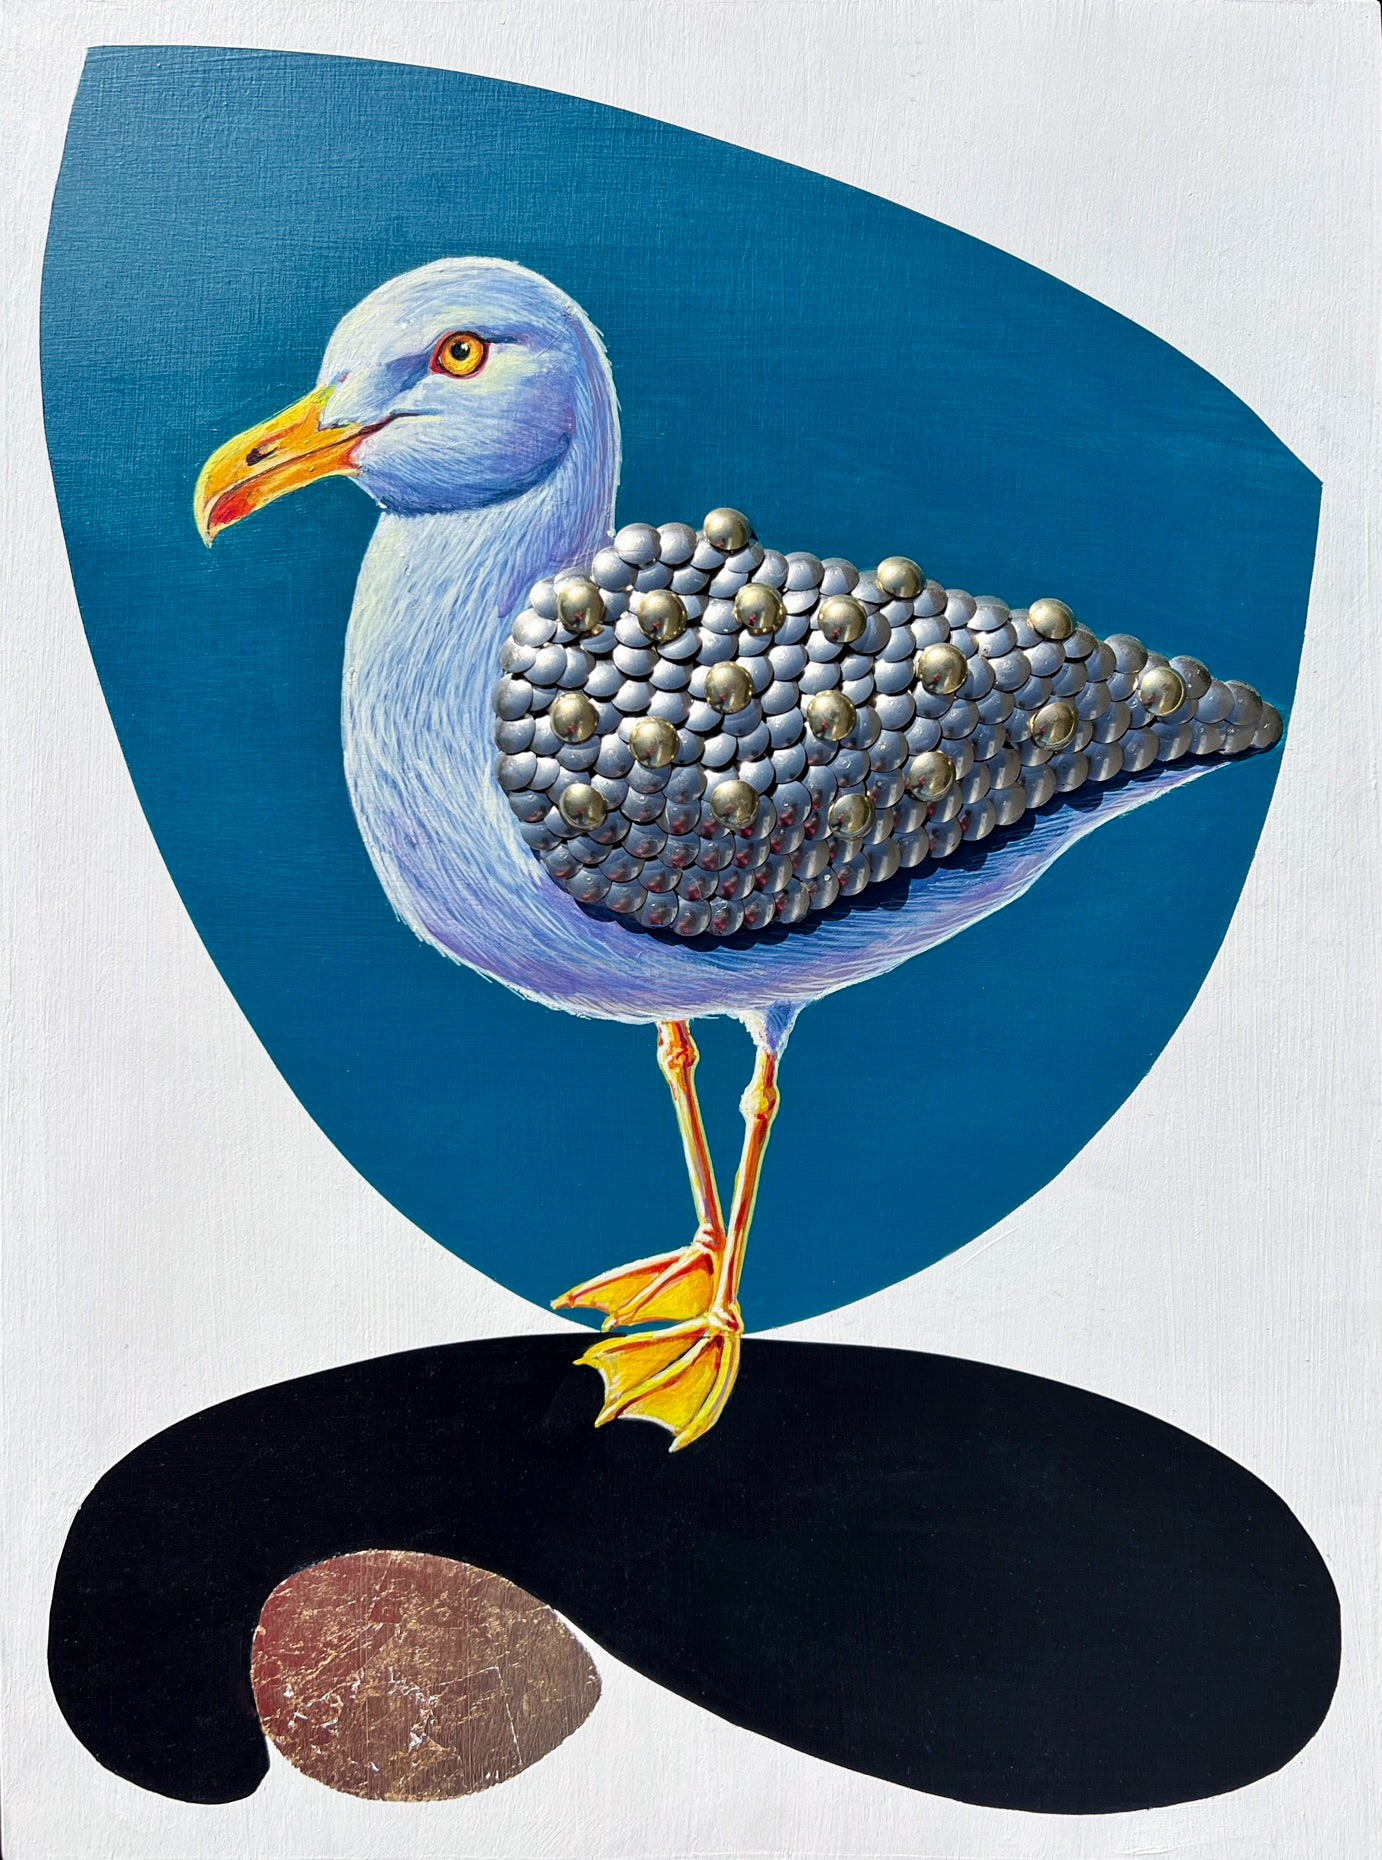 Acrylic painting in blues, whites, and black titled 'Seagull' of seagull by artist Marie Lavallee; painting enhanced with gold and silver leaf, pushpins, and furniture tacks; measures 12"Wx16"H; 